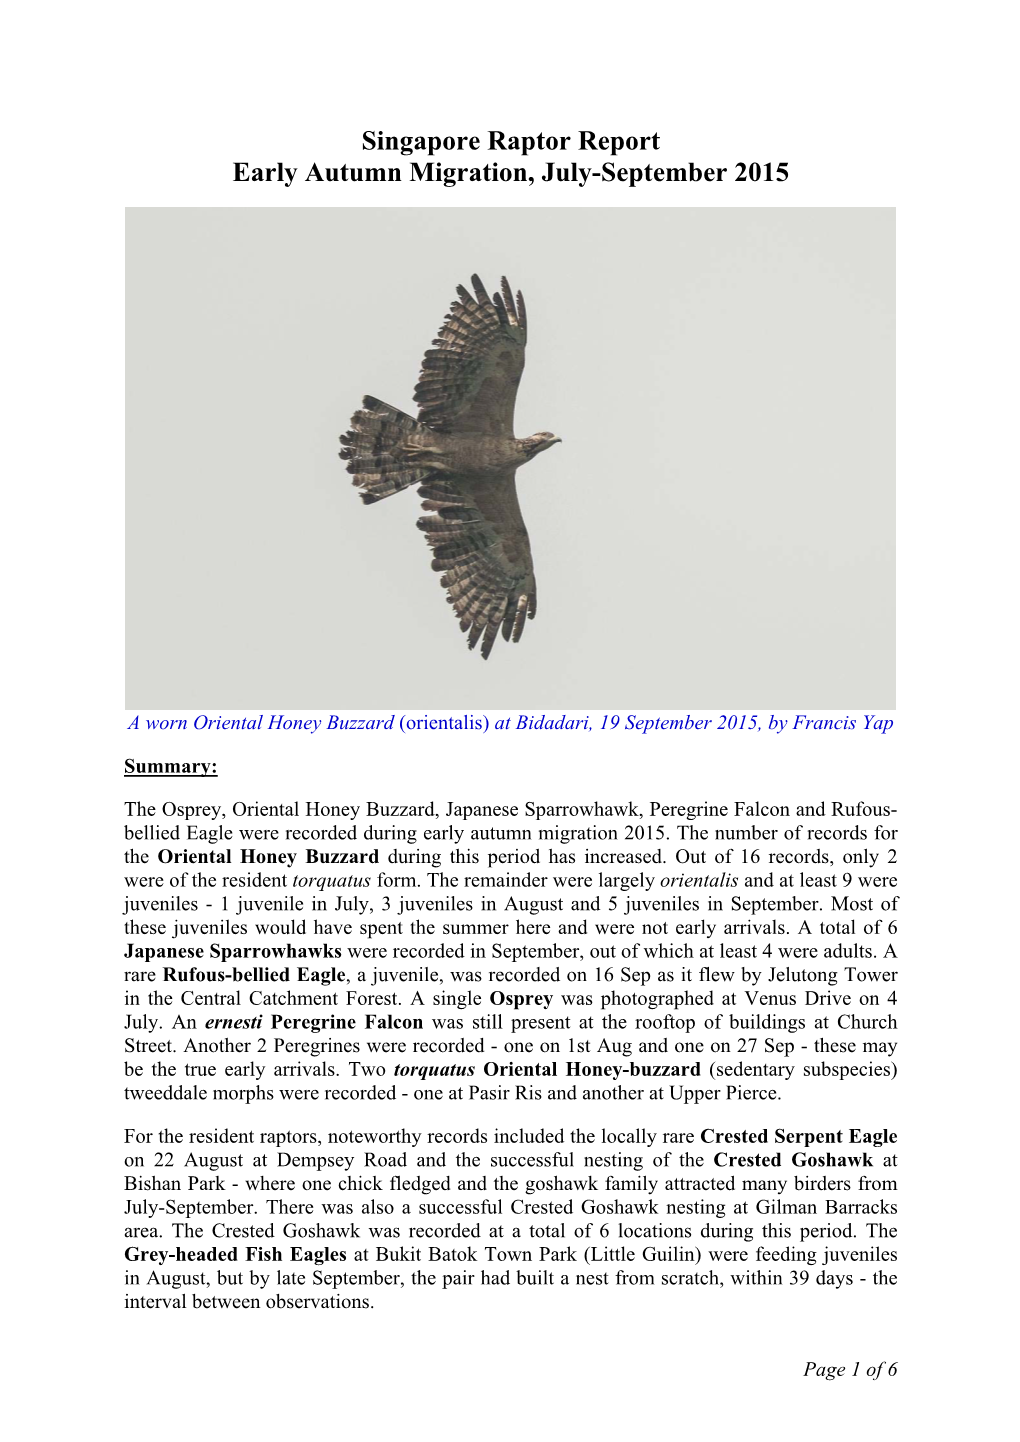 Singapore Raptor Report Early Autumn Migration, July-September 2015